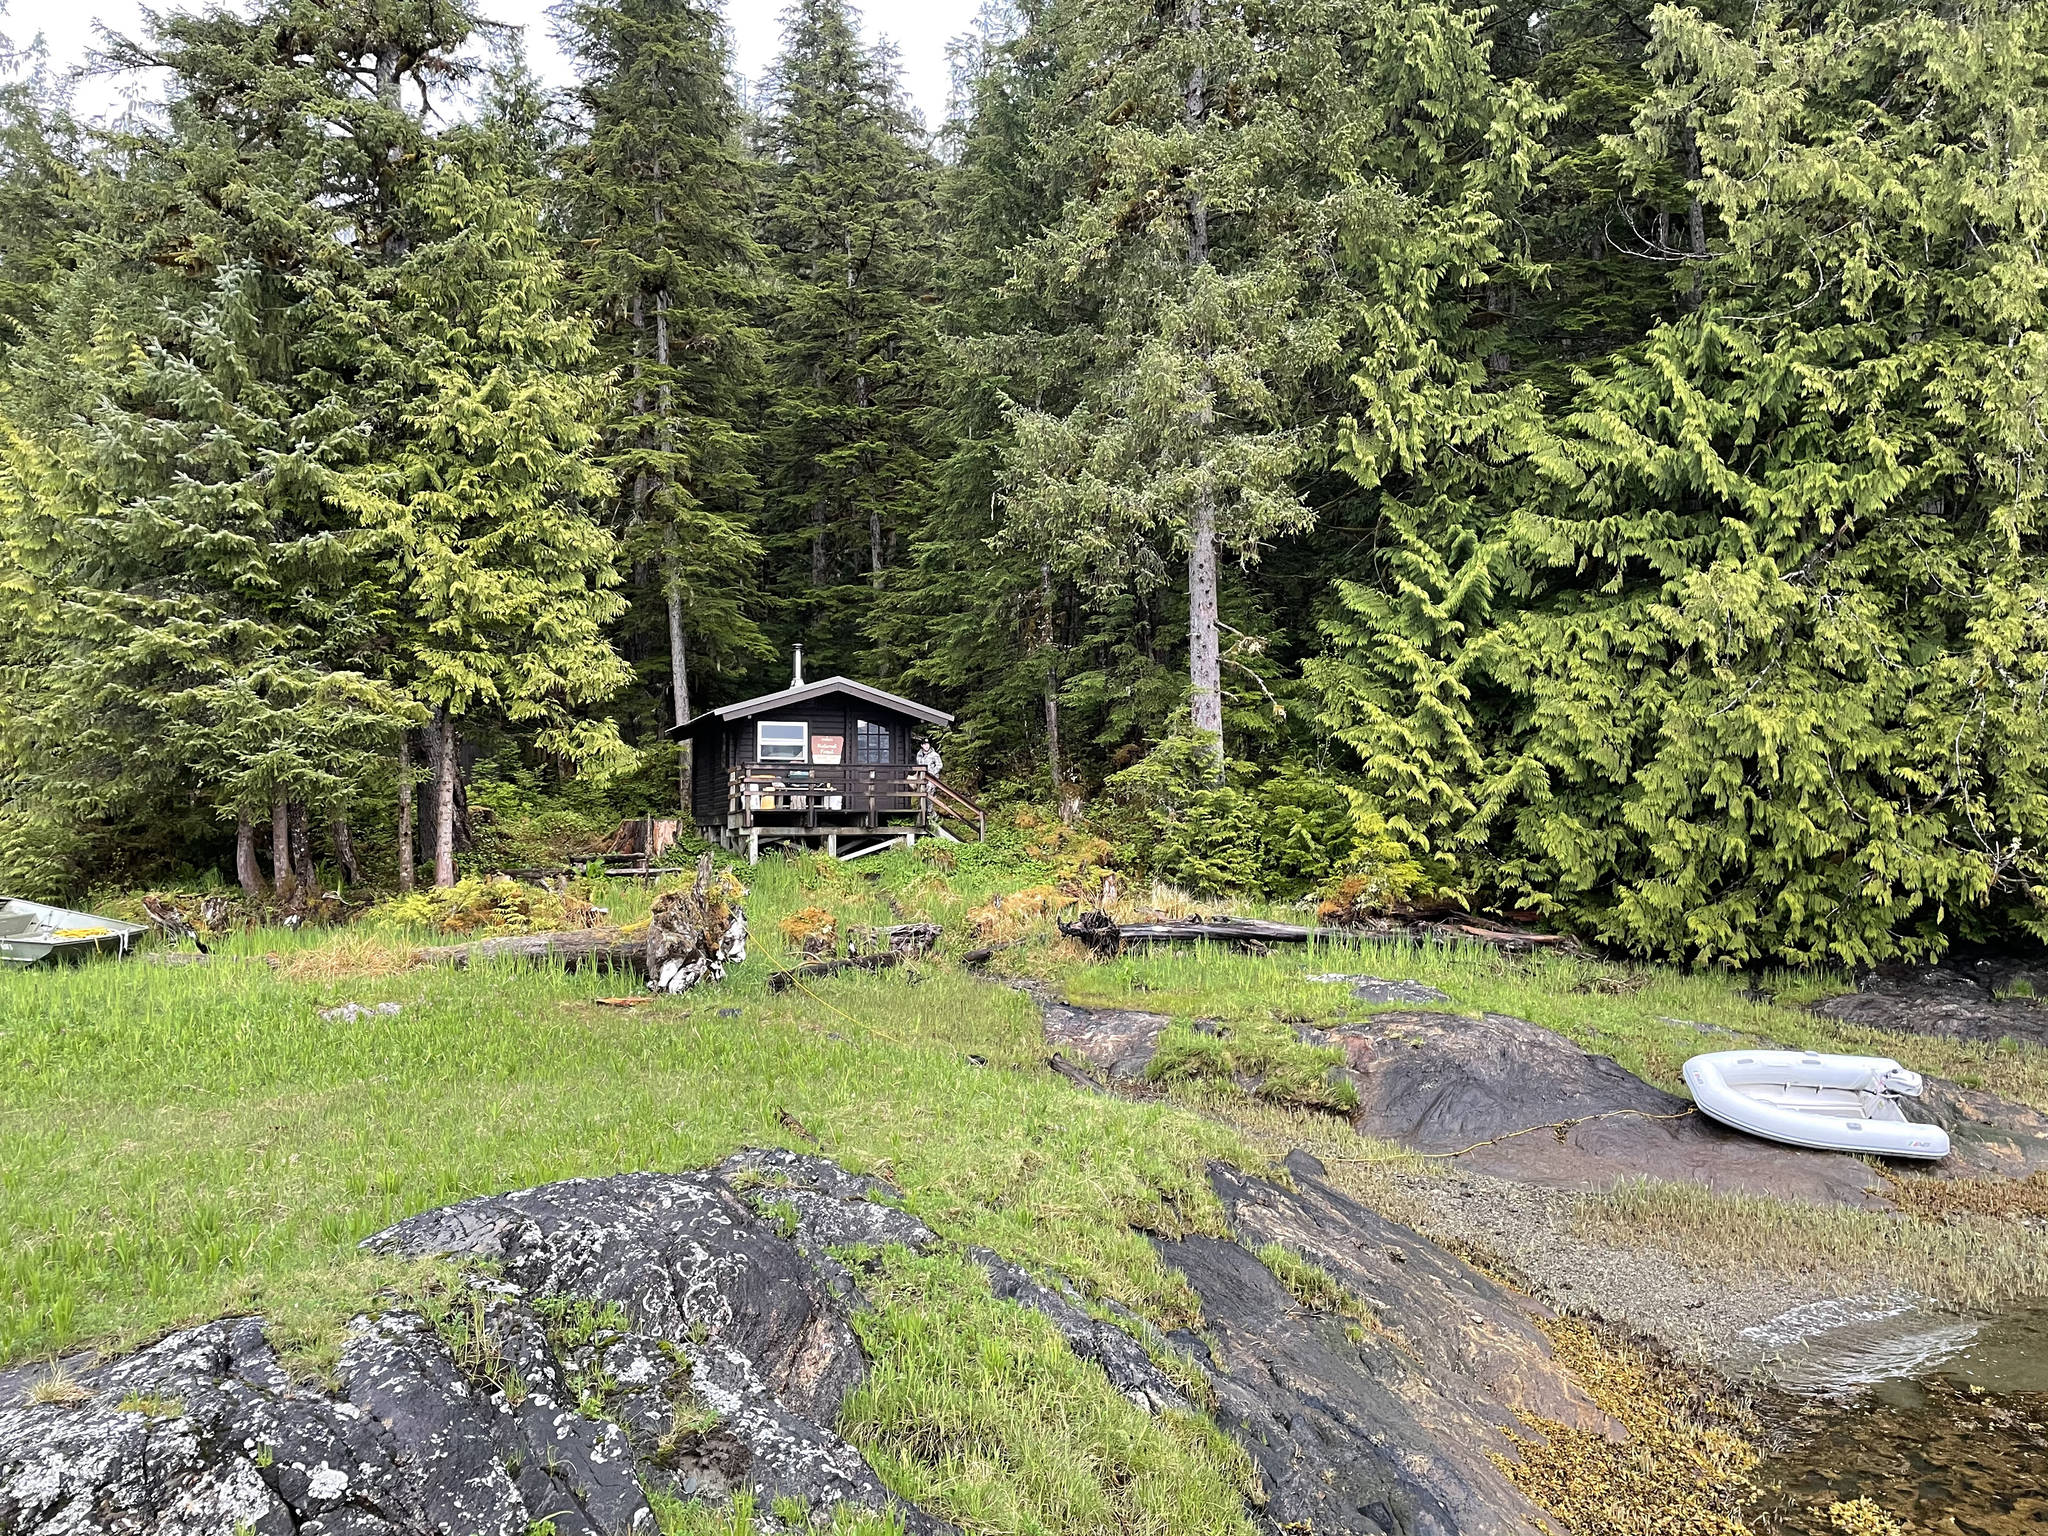 Southeast Alaska is filled with forest service cabins that provide unique places to spend a weekend and connect with previous visitors. (Jeff Lund / For the Juneau Empire)